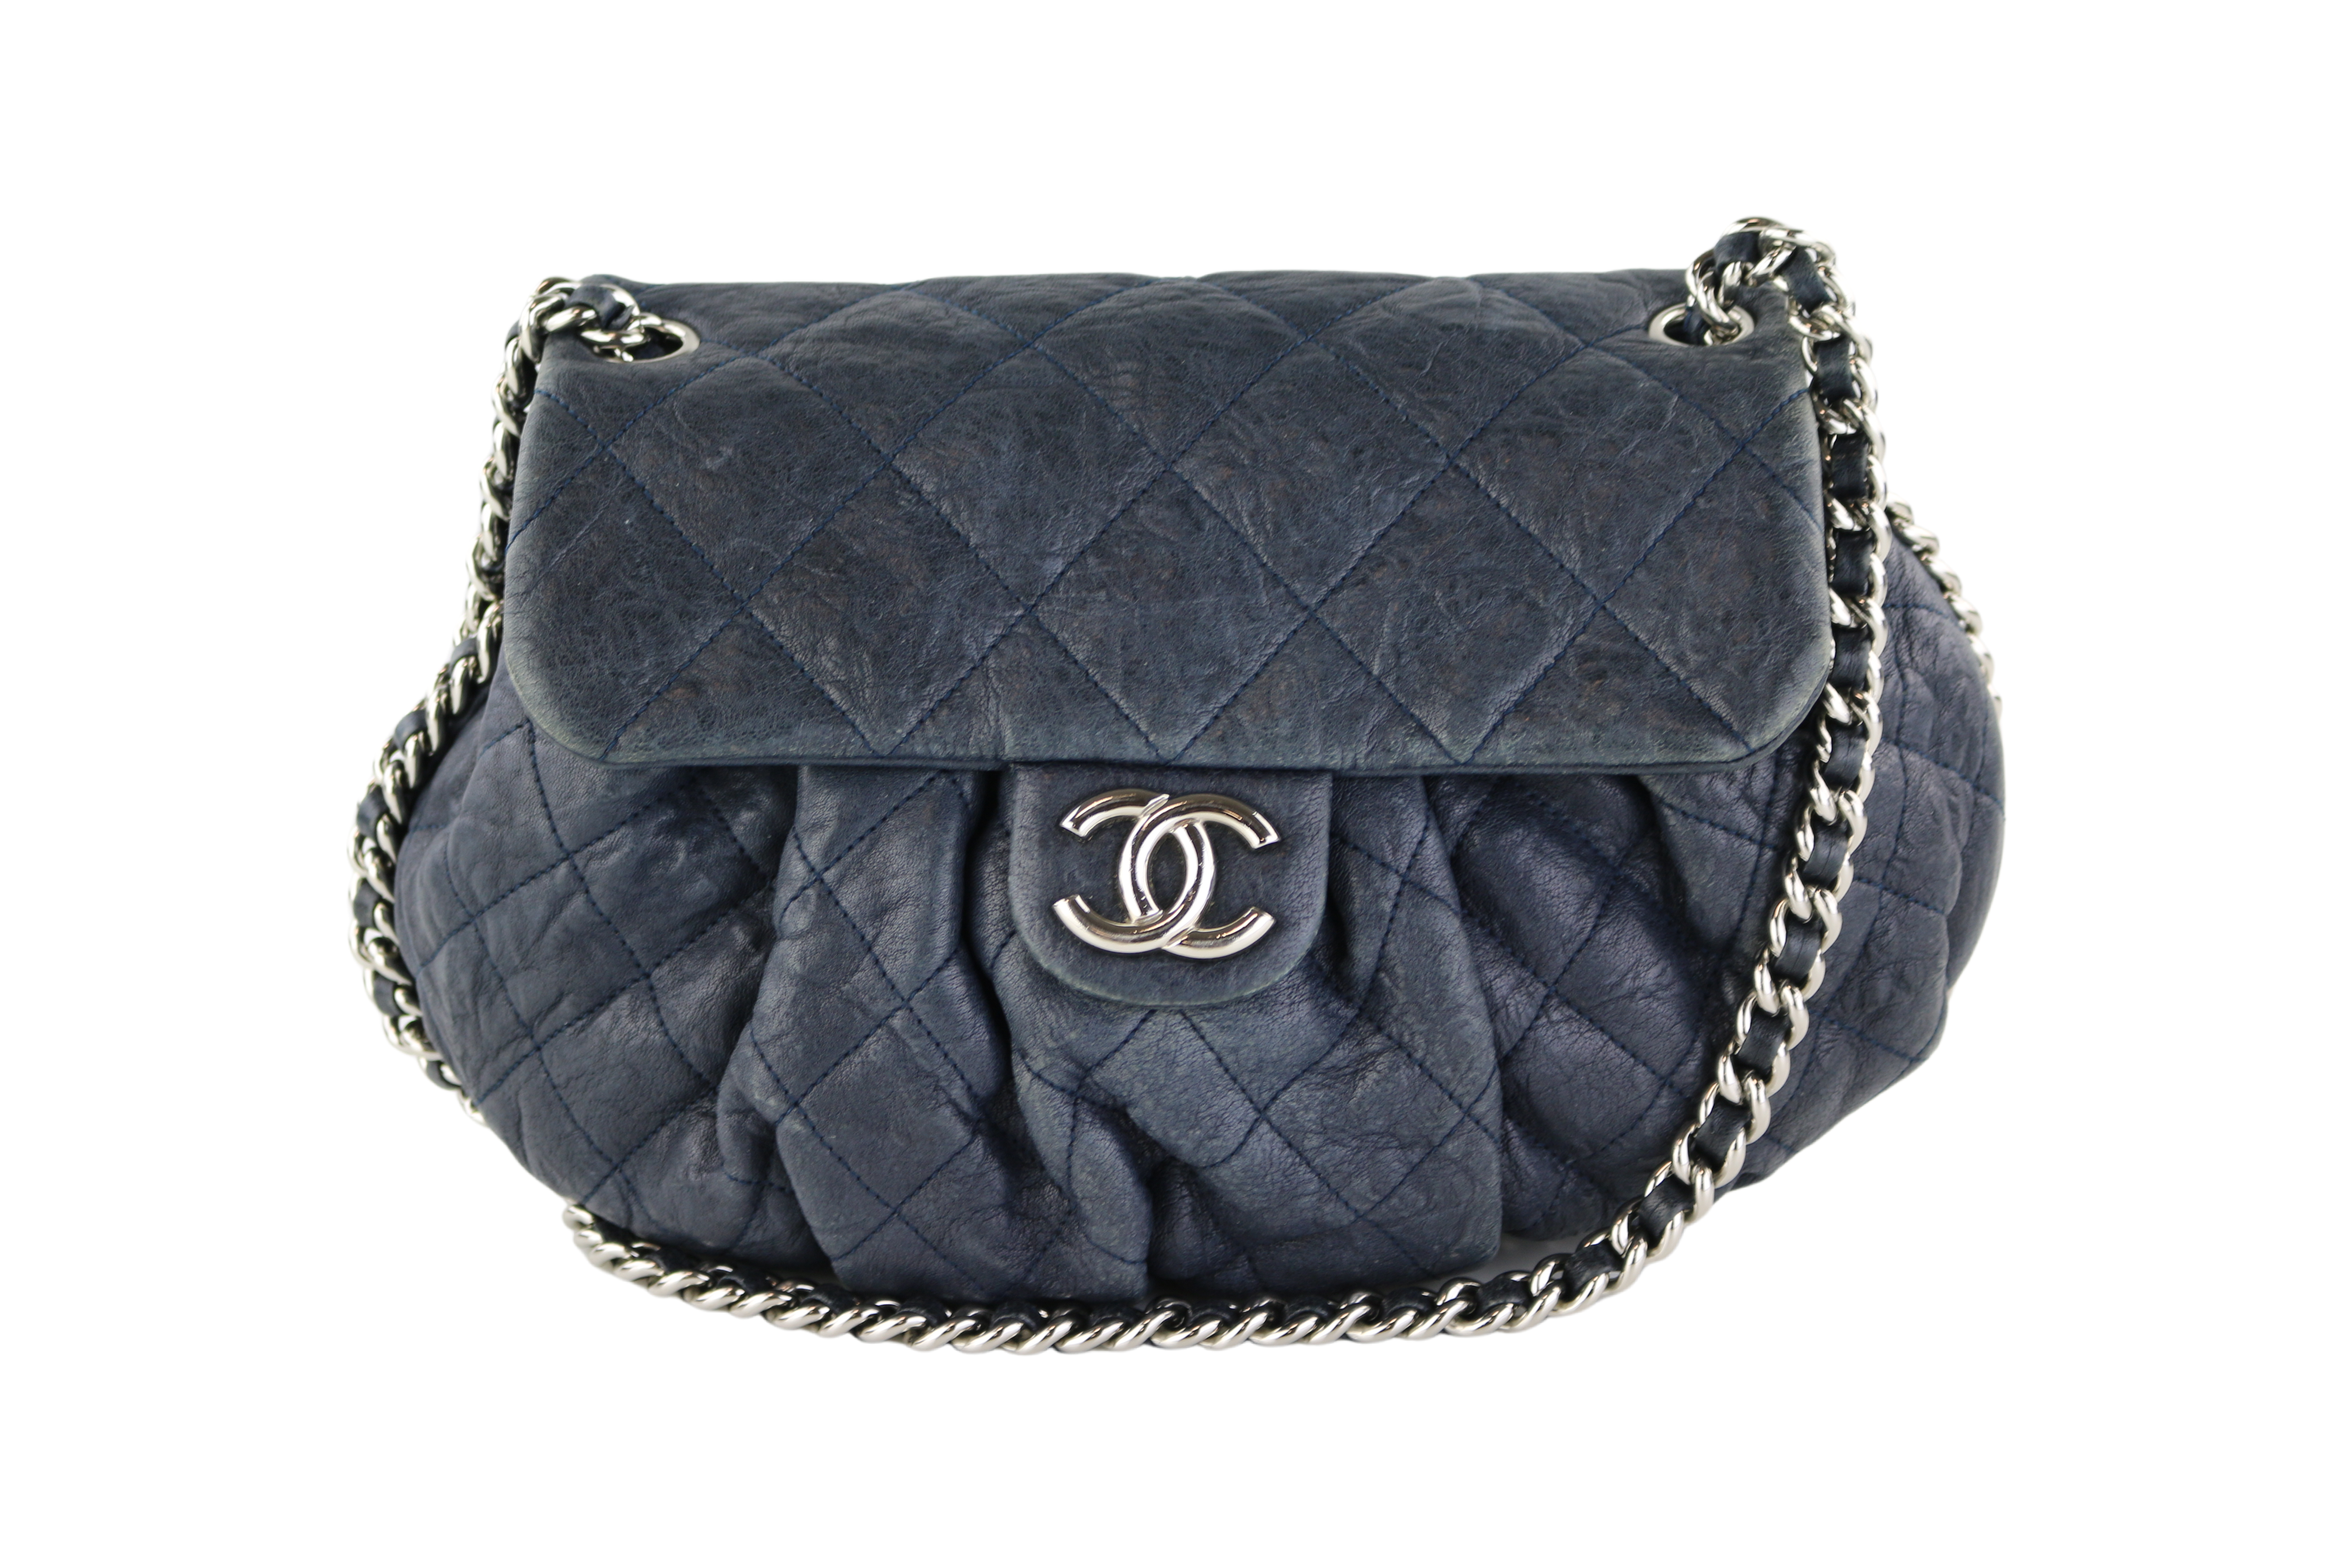 Chanel Quilted Medium Chain Me Flap Bag